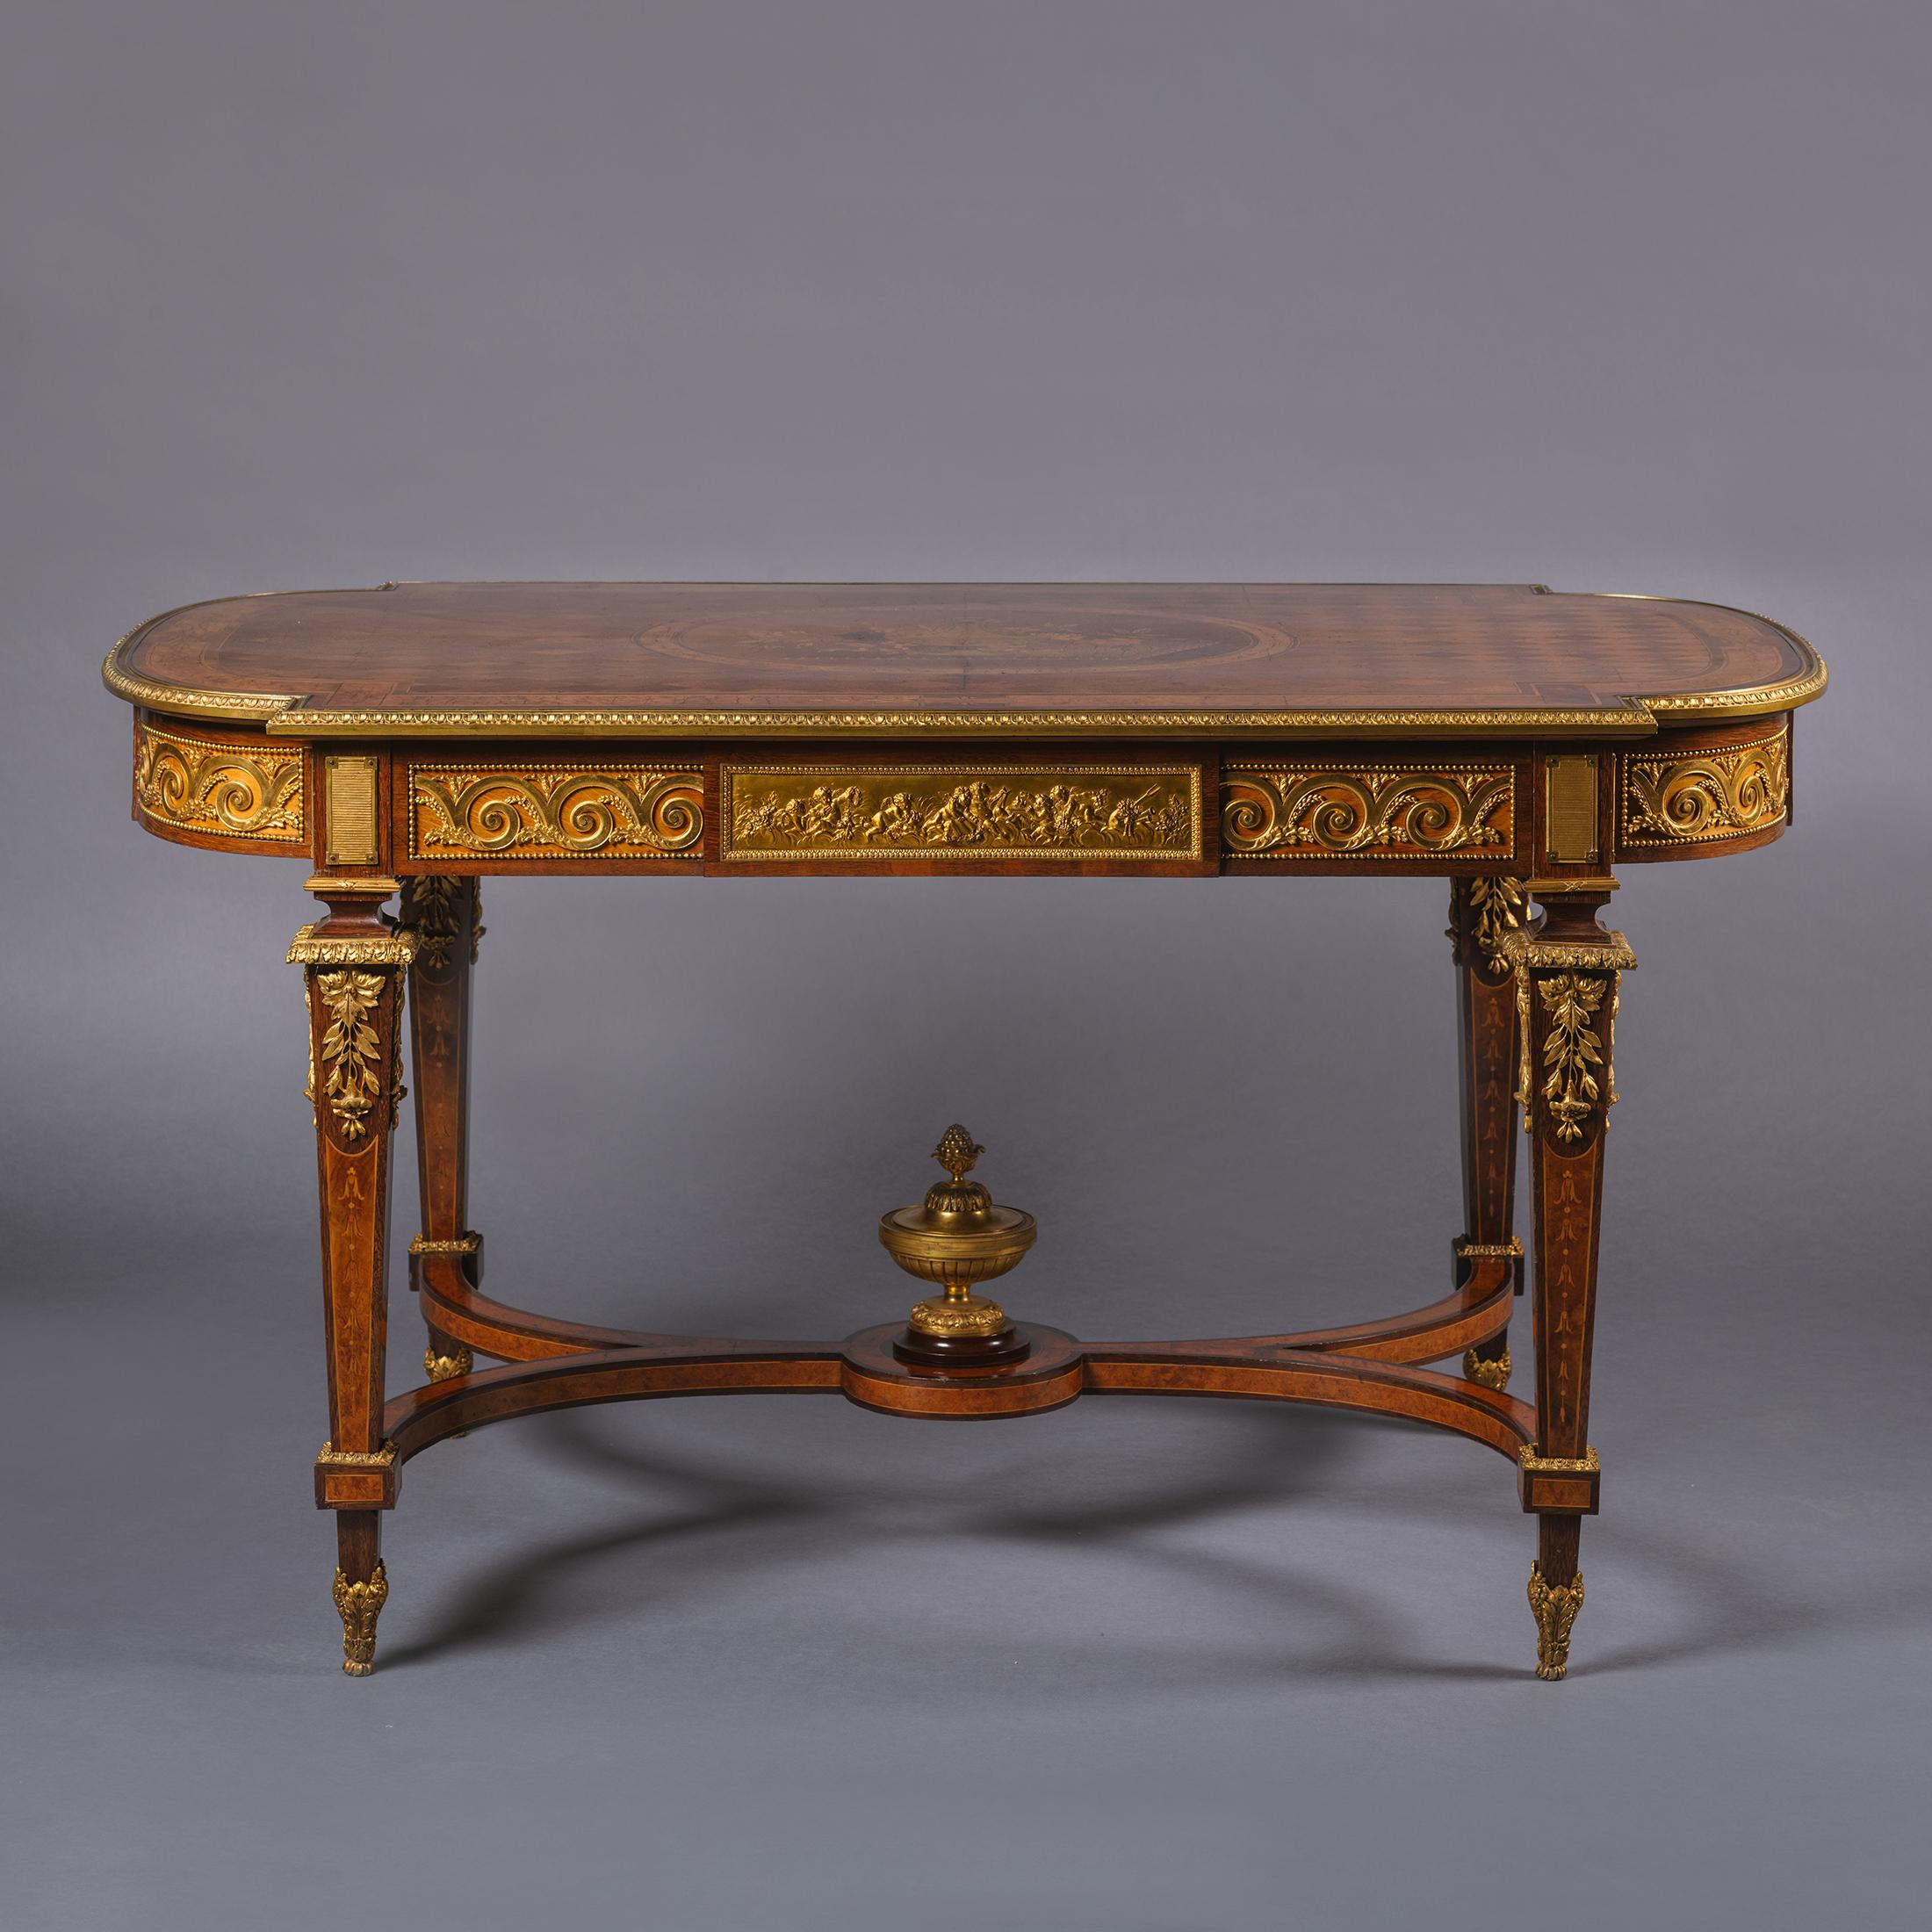 A Louis XVI style gilt-bronze and marquetry centre table.

This impressive centre table is beautifully enriched with cuivre doré mounts. The top has a lozenge pattern parquetry ground encircling an oval panel with a marquetry trompe l'oeil of a